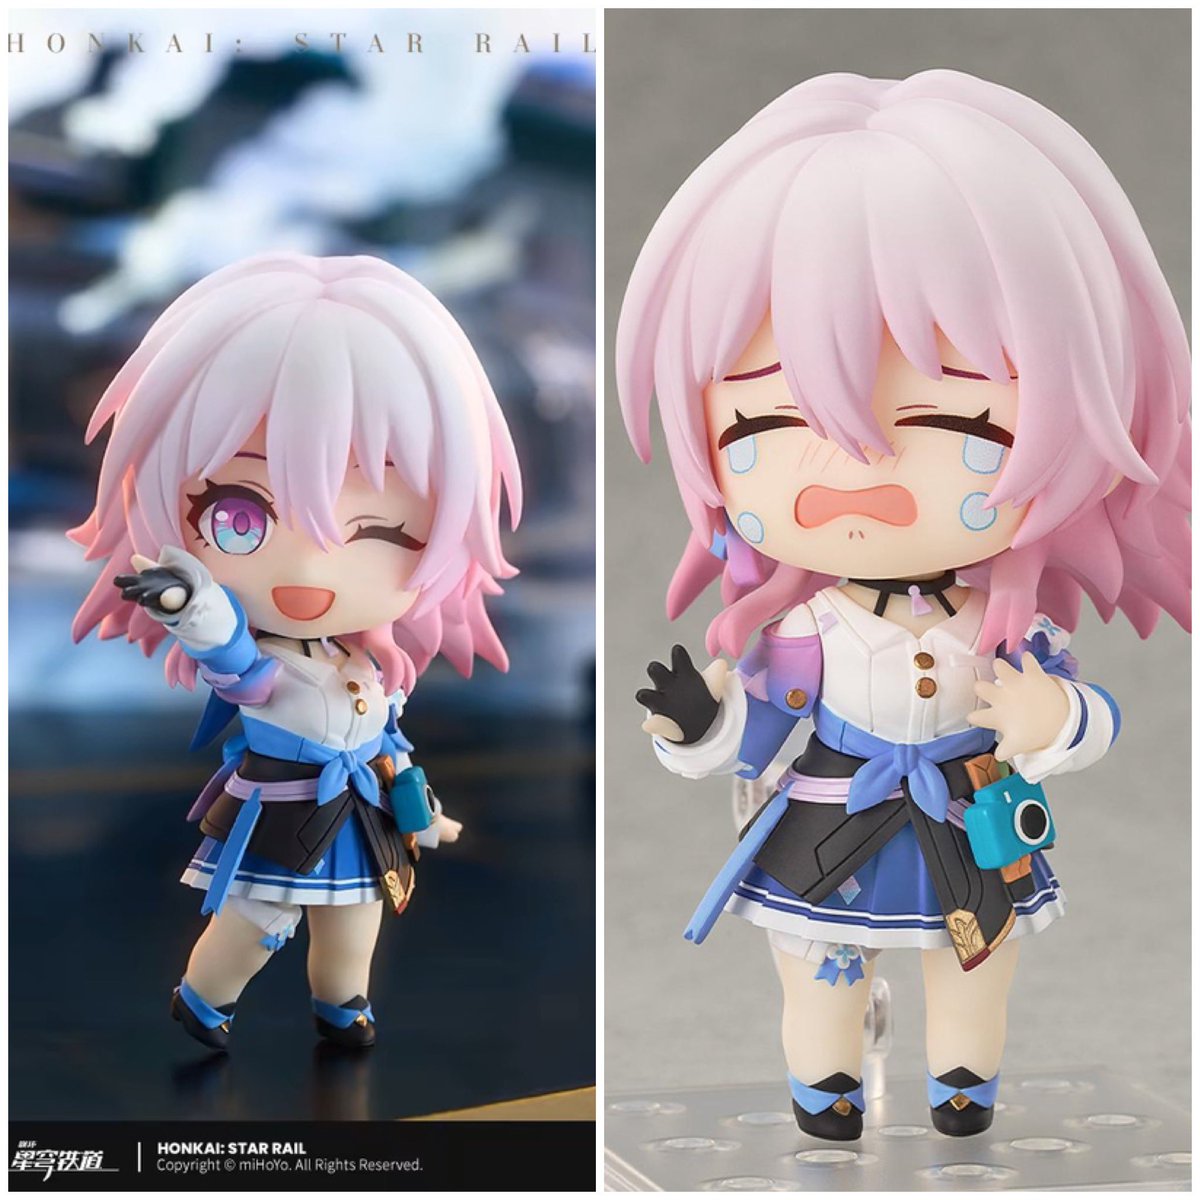 [HELP RT/🇲🇾 GO] #pasaranimeMY

❄️ Official Nendoroid March 7th
❄️ With PO Bonus: Shikishi
❄️ Price RM240
❄️ Need 2nd payment
❄️ Depo RM50/100
❄️ ETA: January’25
❄️ Close PO: July’24 or earlier

💌 DM to order
🎁 Freebies provided

Help rt tysm❣️@pasaranimeMY #honkaistarrail  #hsr